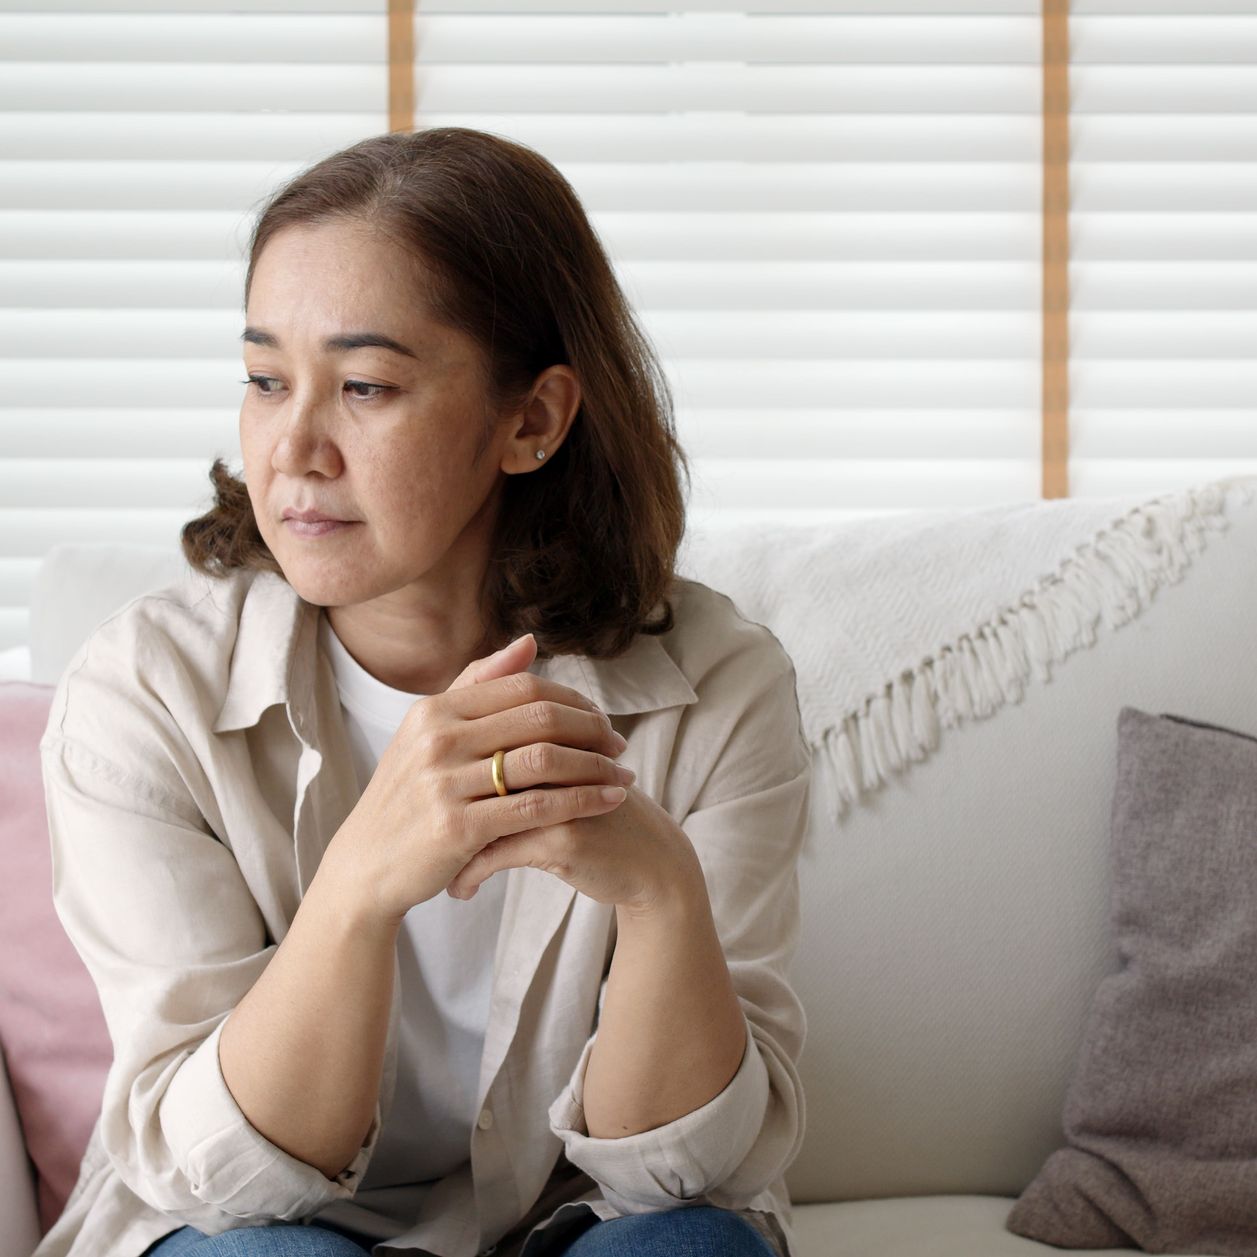 Empty nest syndrome affects mothers much more. How to face and manage it?